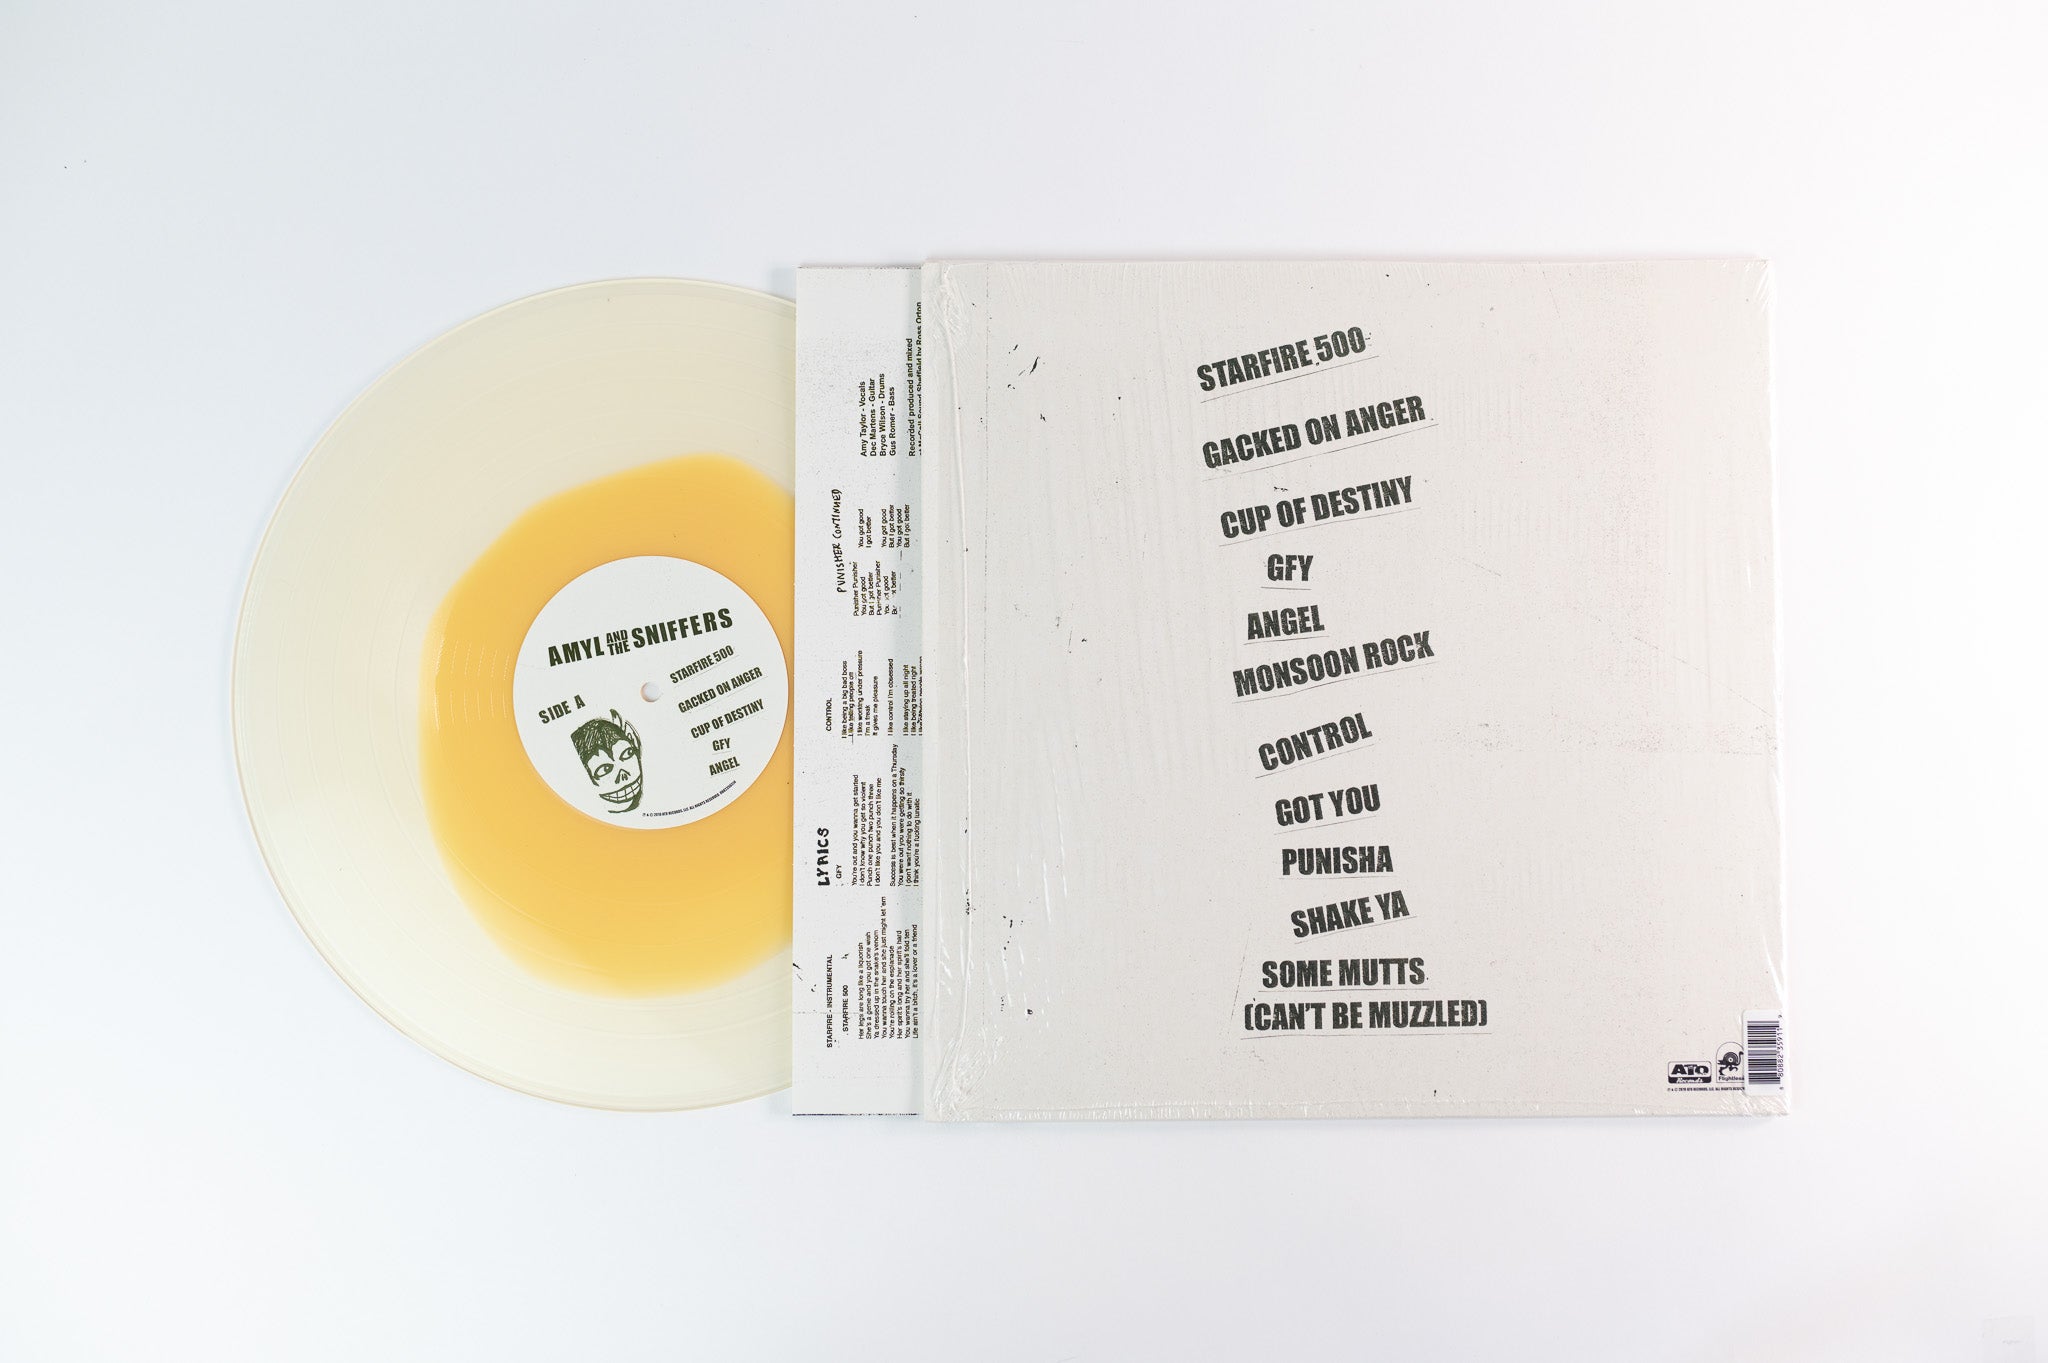 Amyl And The Sniffers - Amyl And The Sniffers on ATO Ltd Egg Clear with Yellow Blob